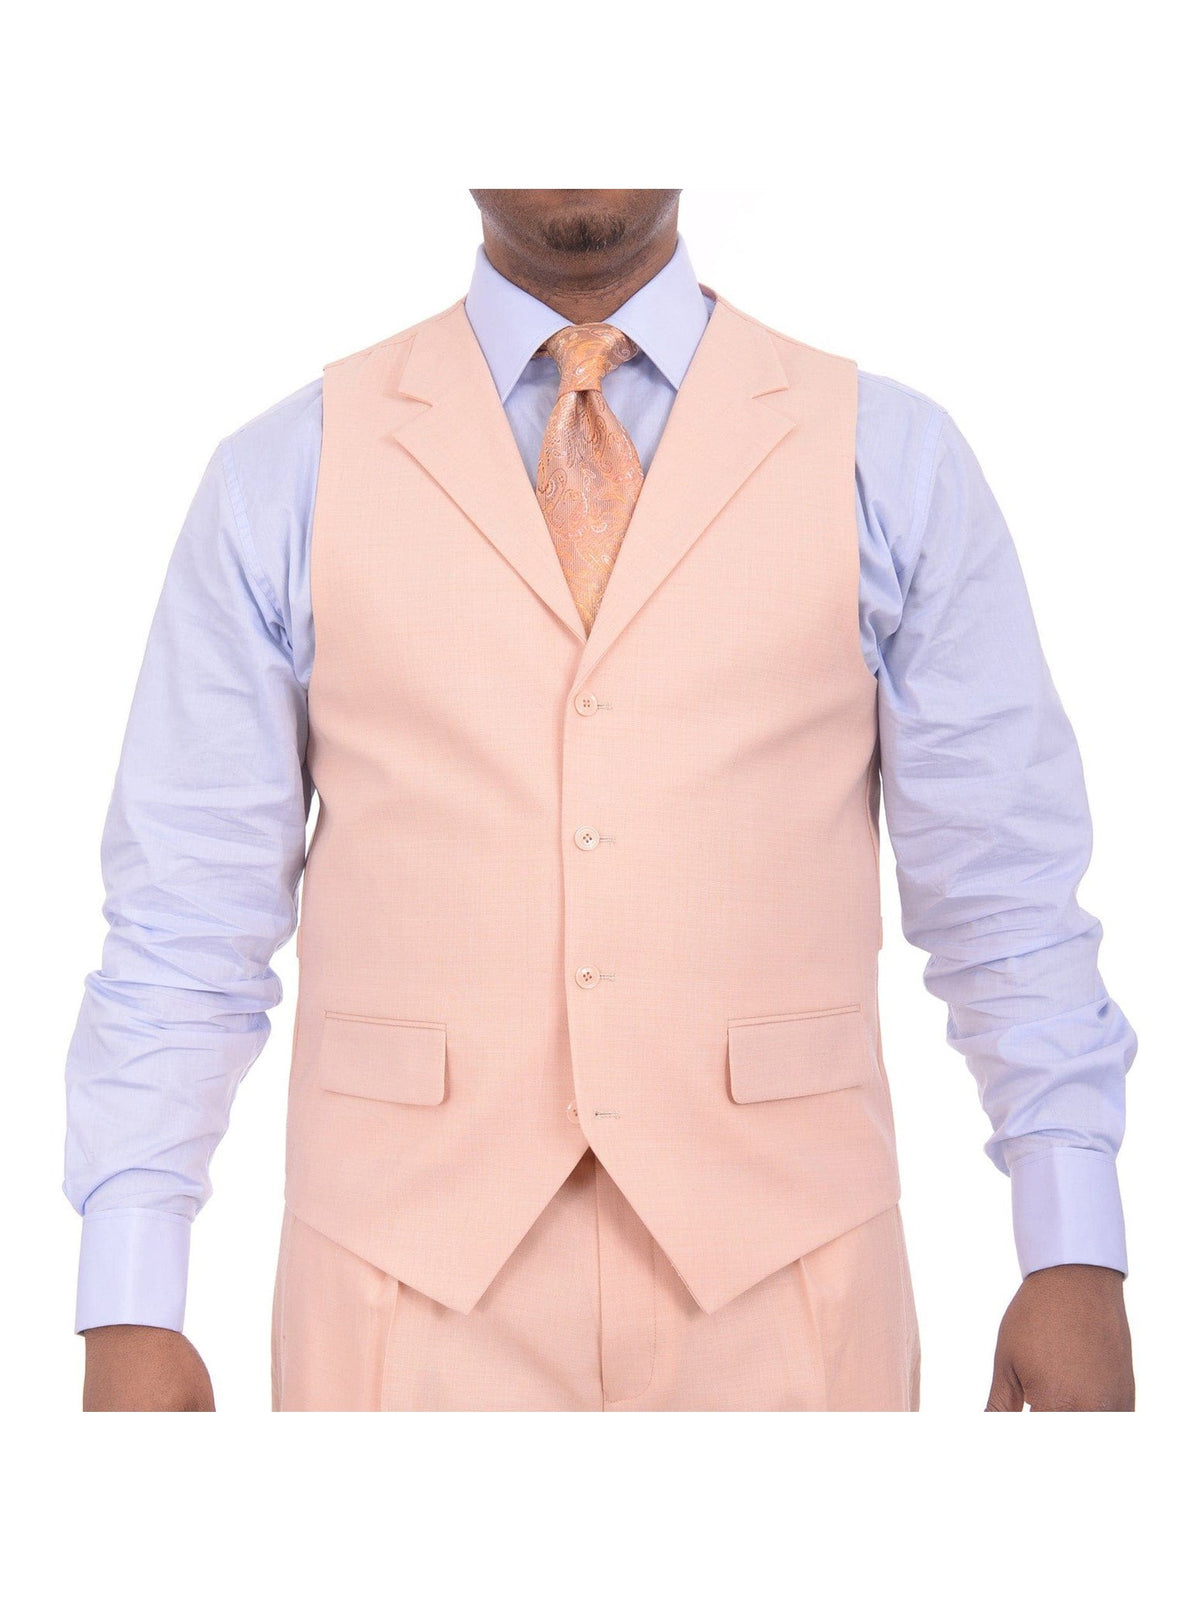 Apollo King THREE PIECE SUITS Apollo King Mens Solid Peach Three Piece Wool Suit With Peak Lapels